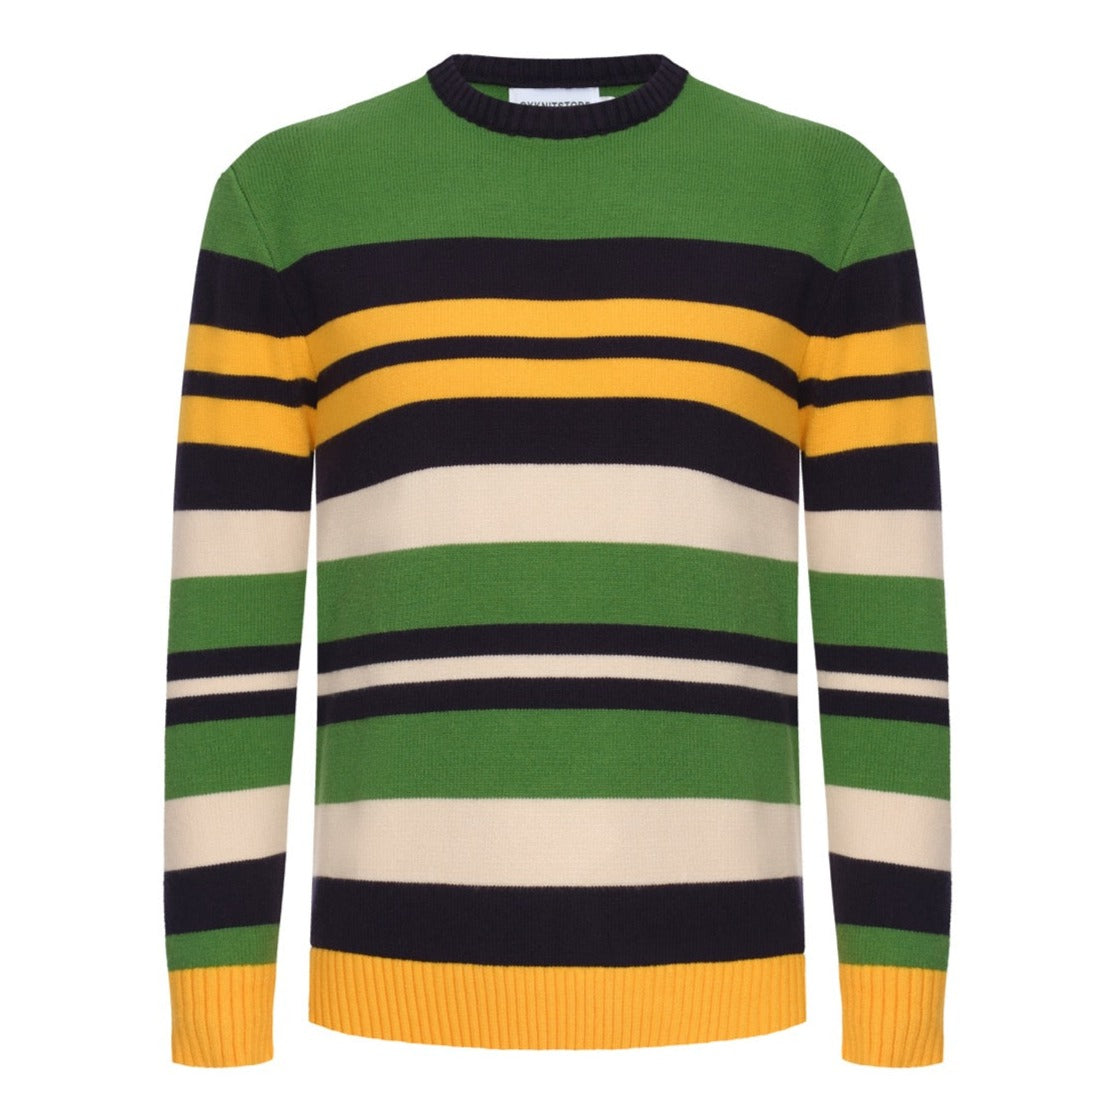 Men's Retro Style Green & Yellow Striped Knitted Long Sleeve Sweater